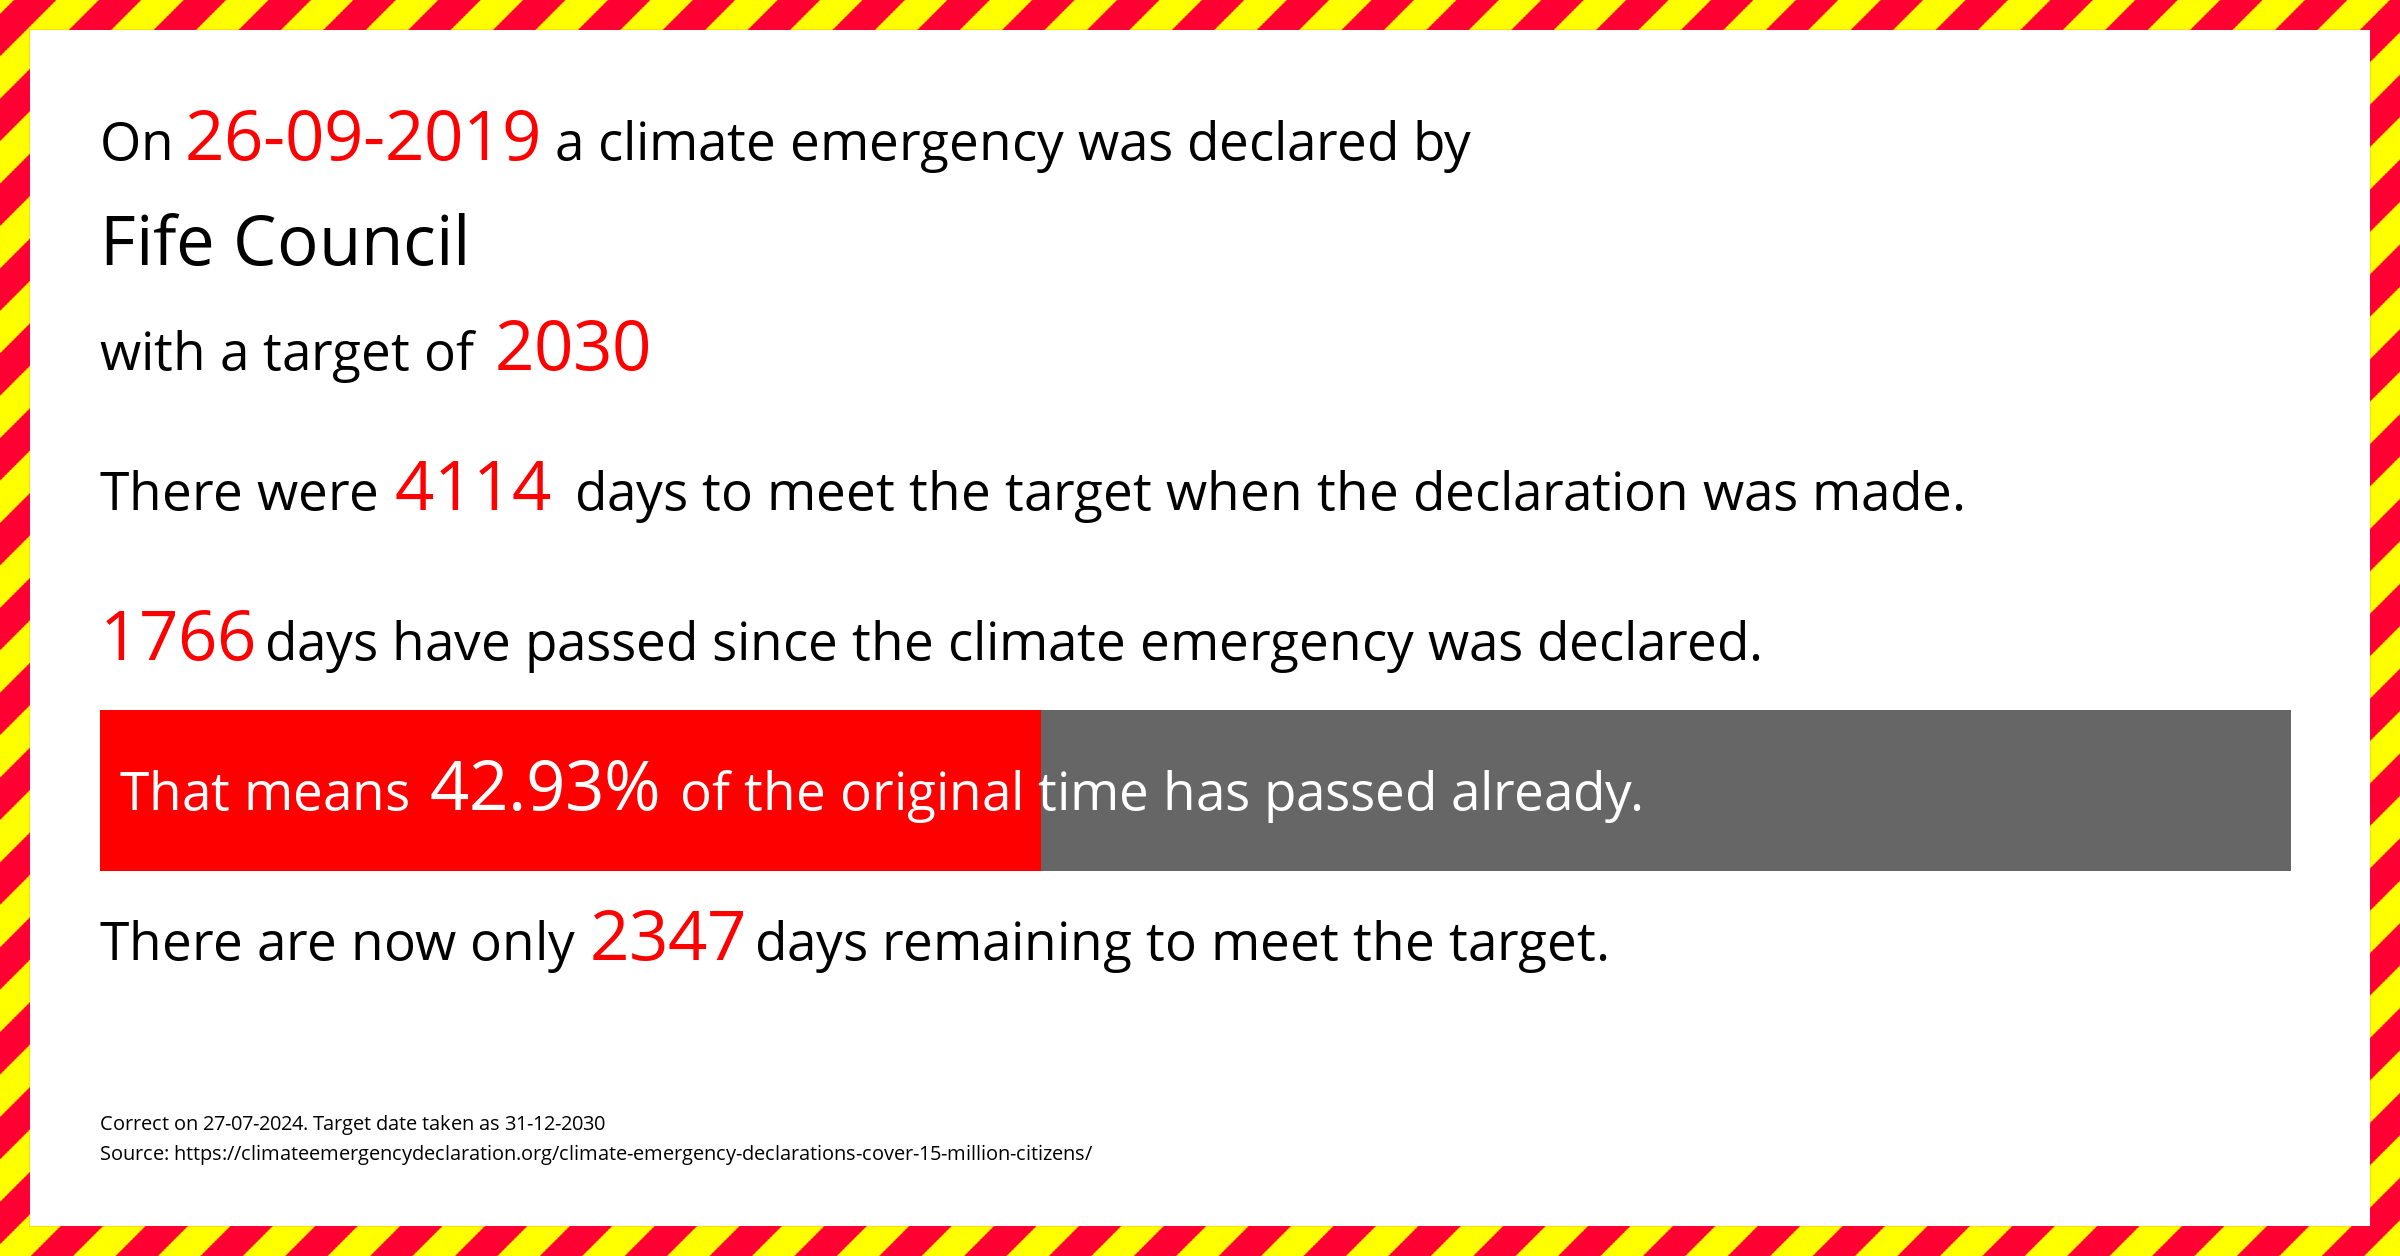 Fife Council declared a Climate emergency on Thursday 26th September 2019, with a target of 2030.